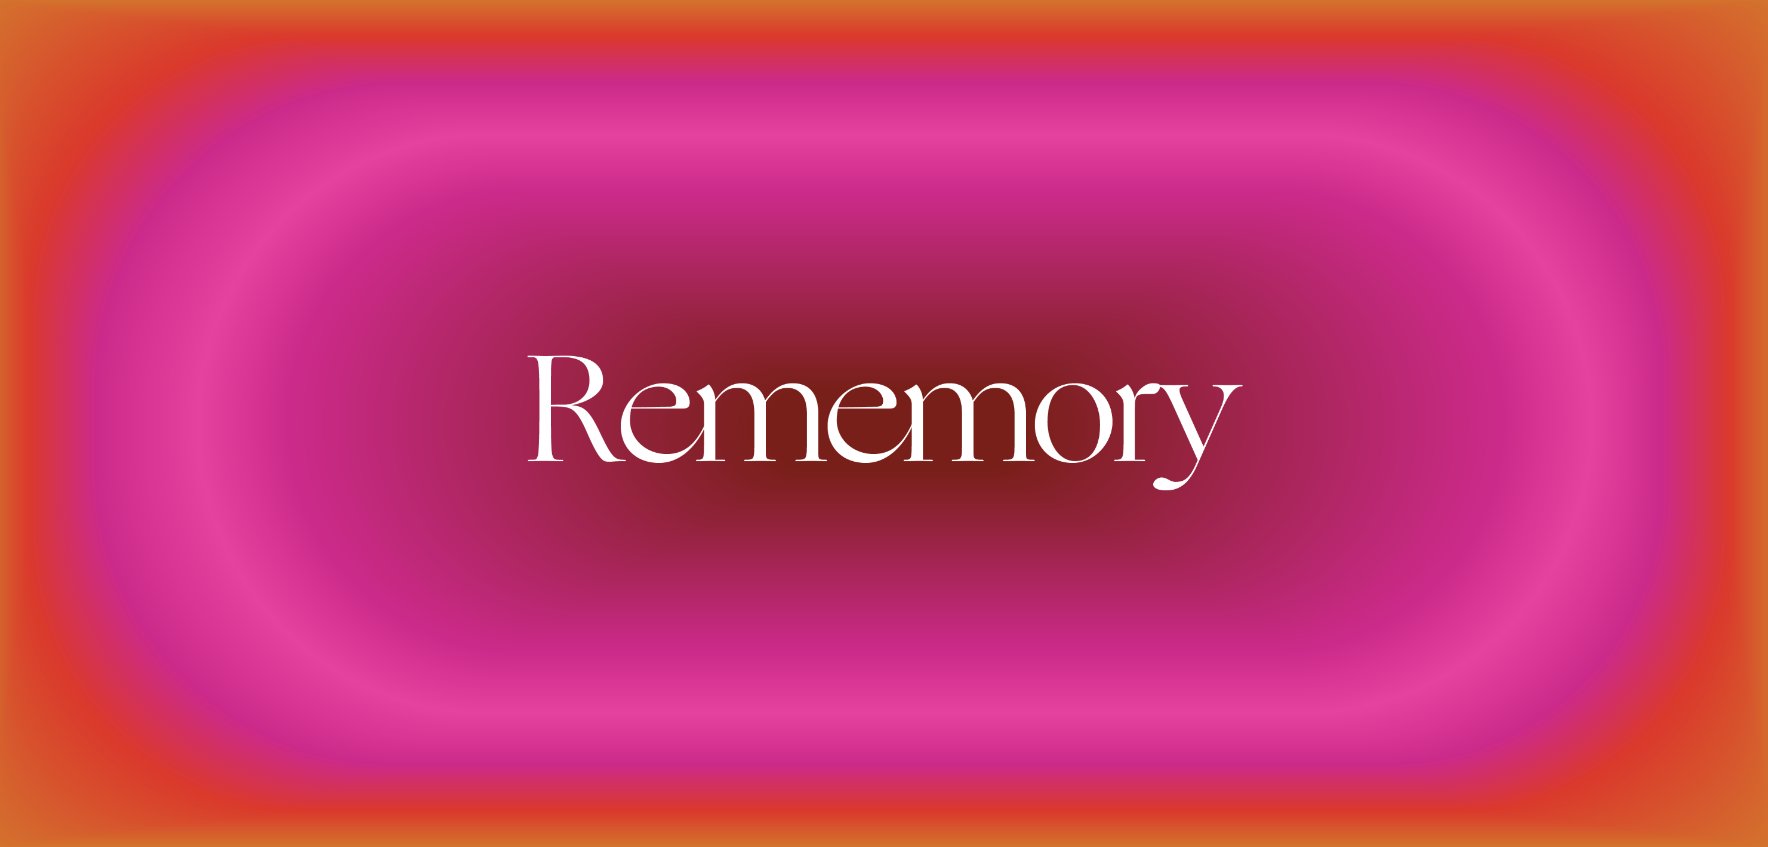 Rememory Directory is the Community for Black Women & Nonbinary Creatives to Reclaim Narratives